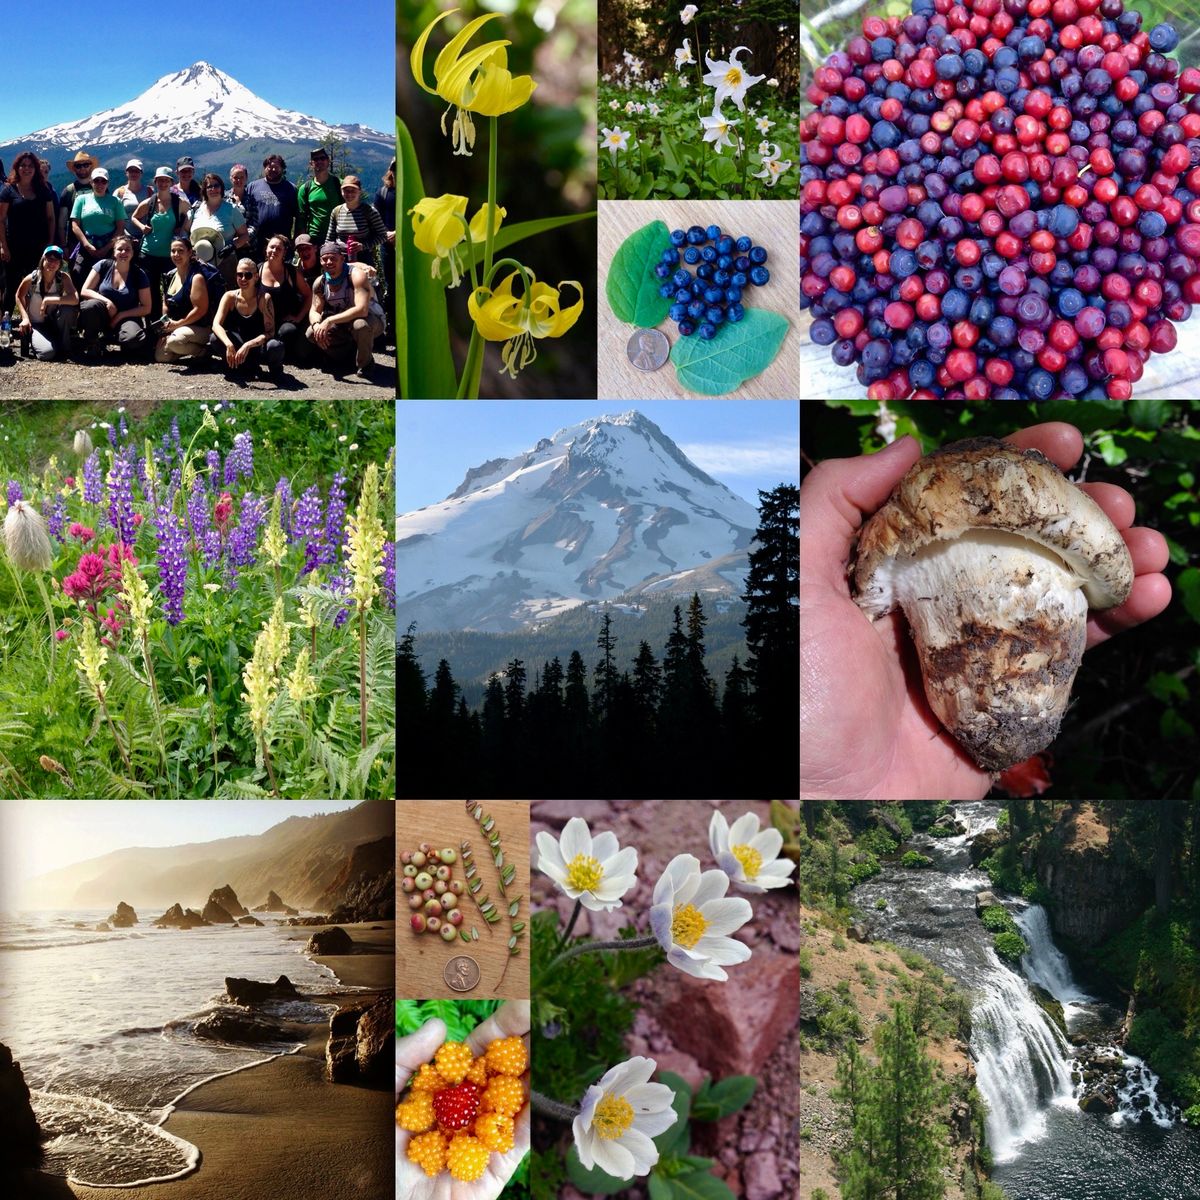 Edible & Medicinal Plants of the Pacific Northwest: Herb Walk